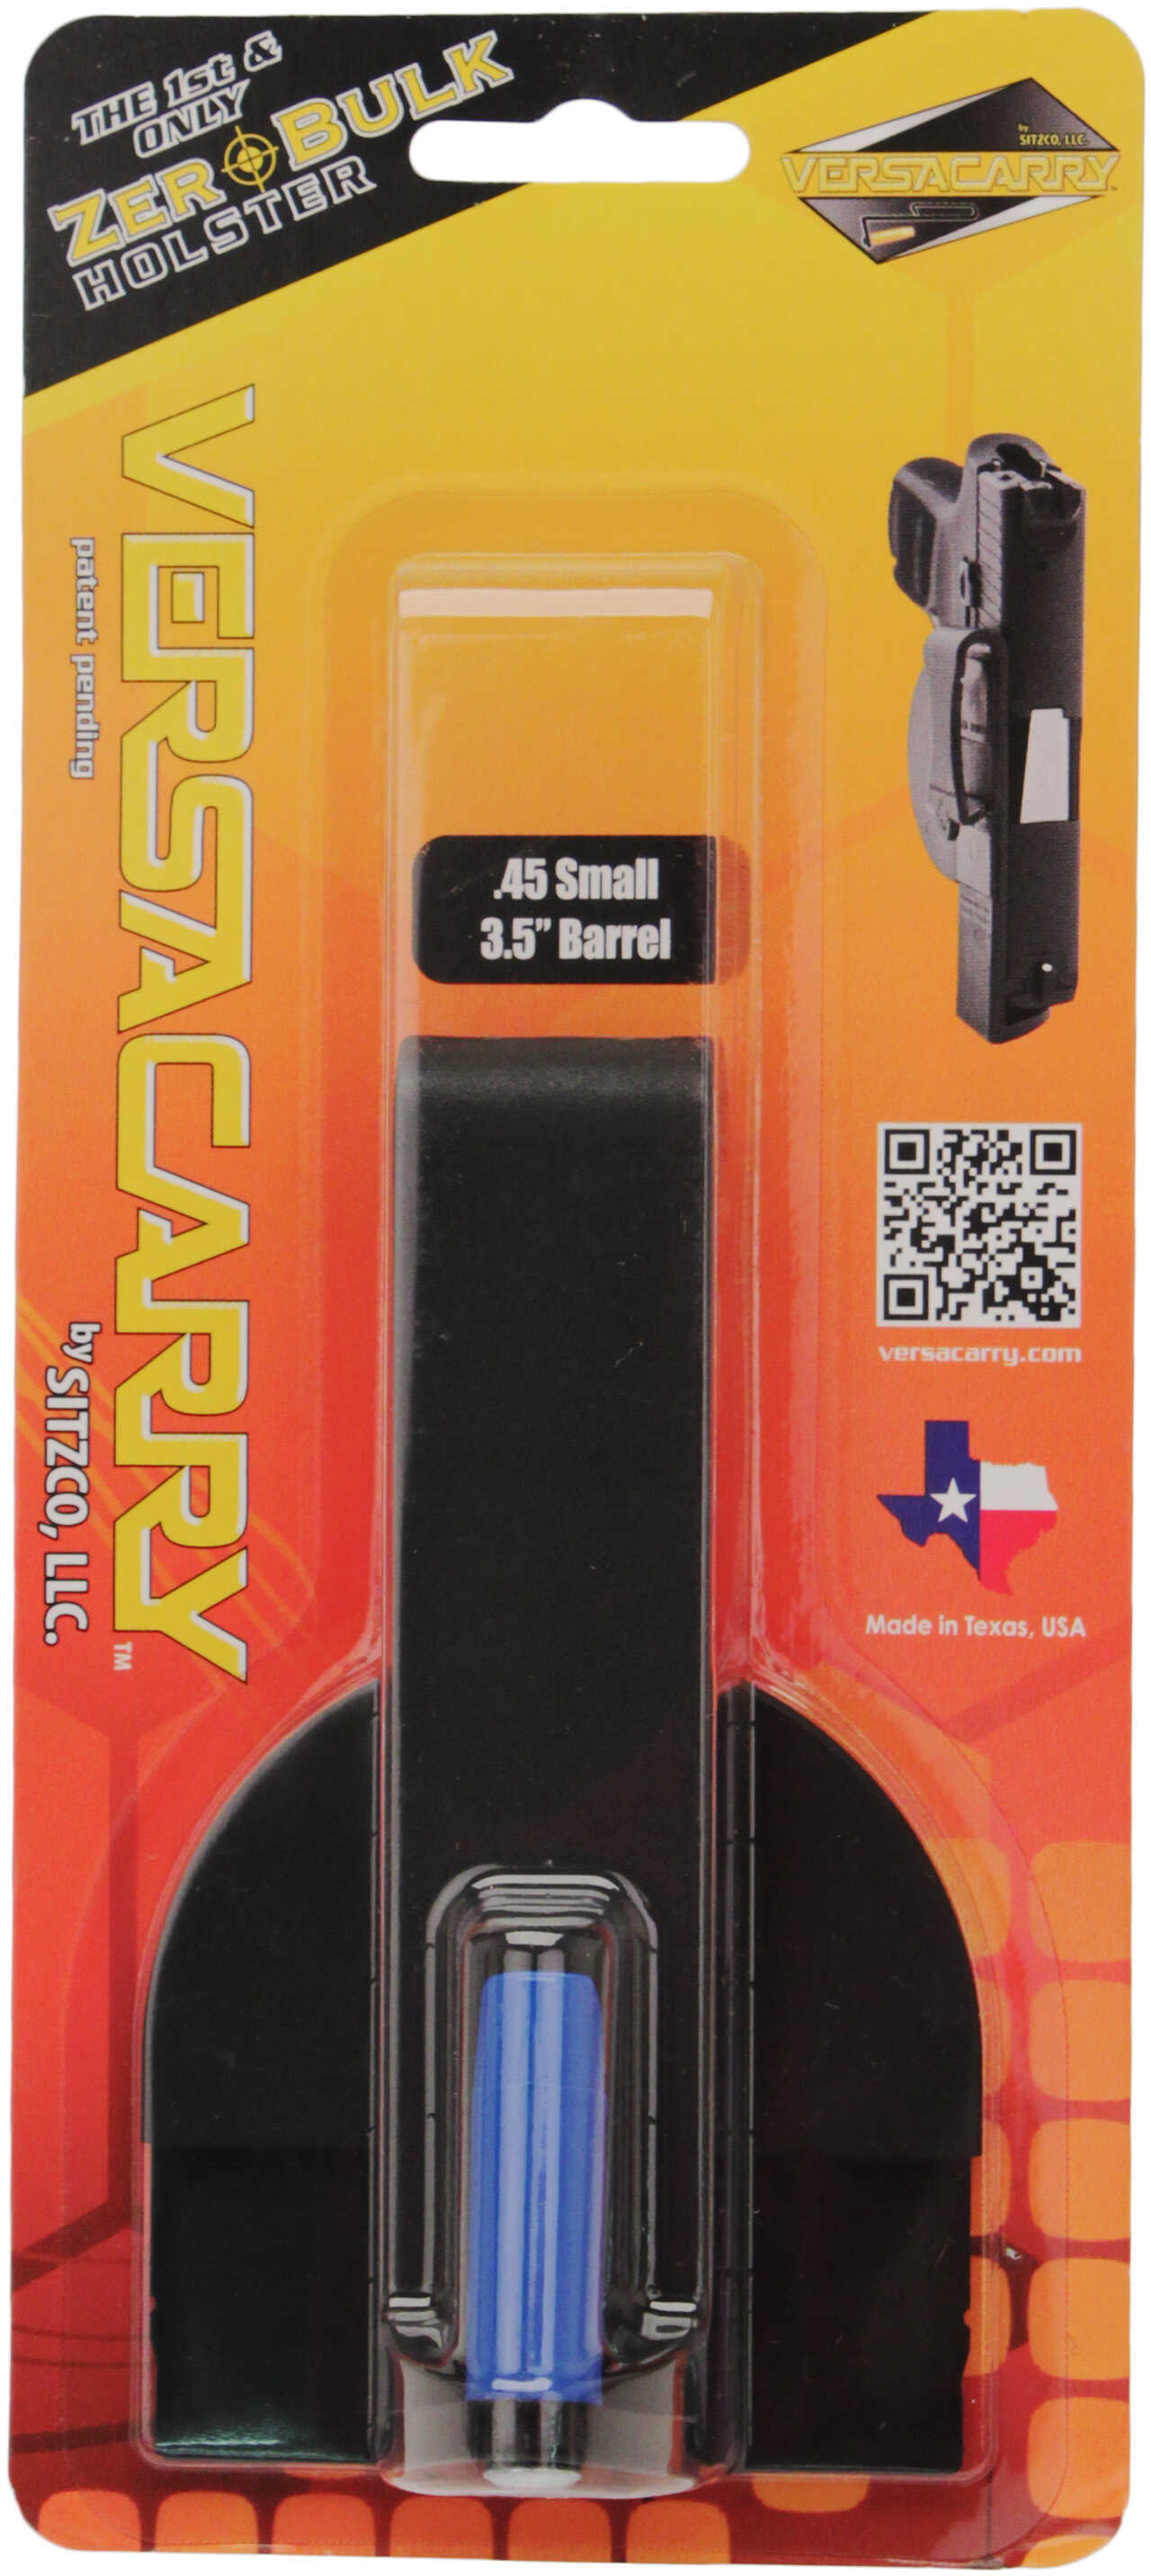 Versa Carry Inside the Pant Holster Fits Small Sized 45 ACP Pistol with 3.5" Barrel Black Polymer 45SM